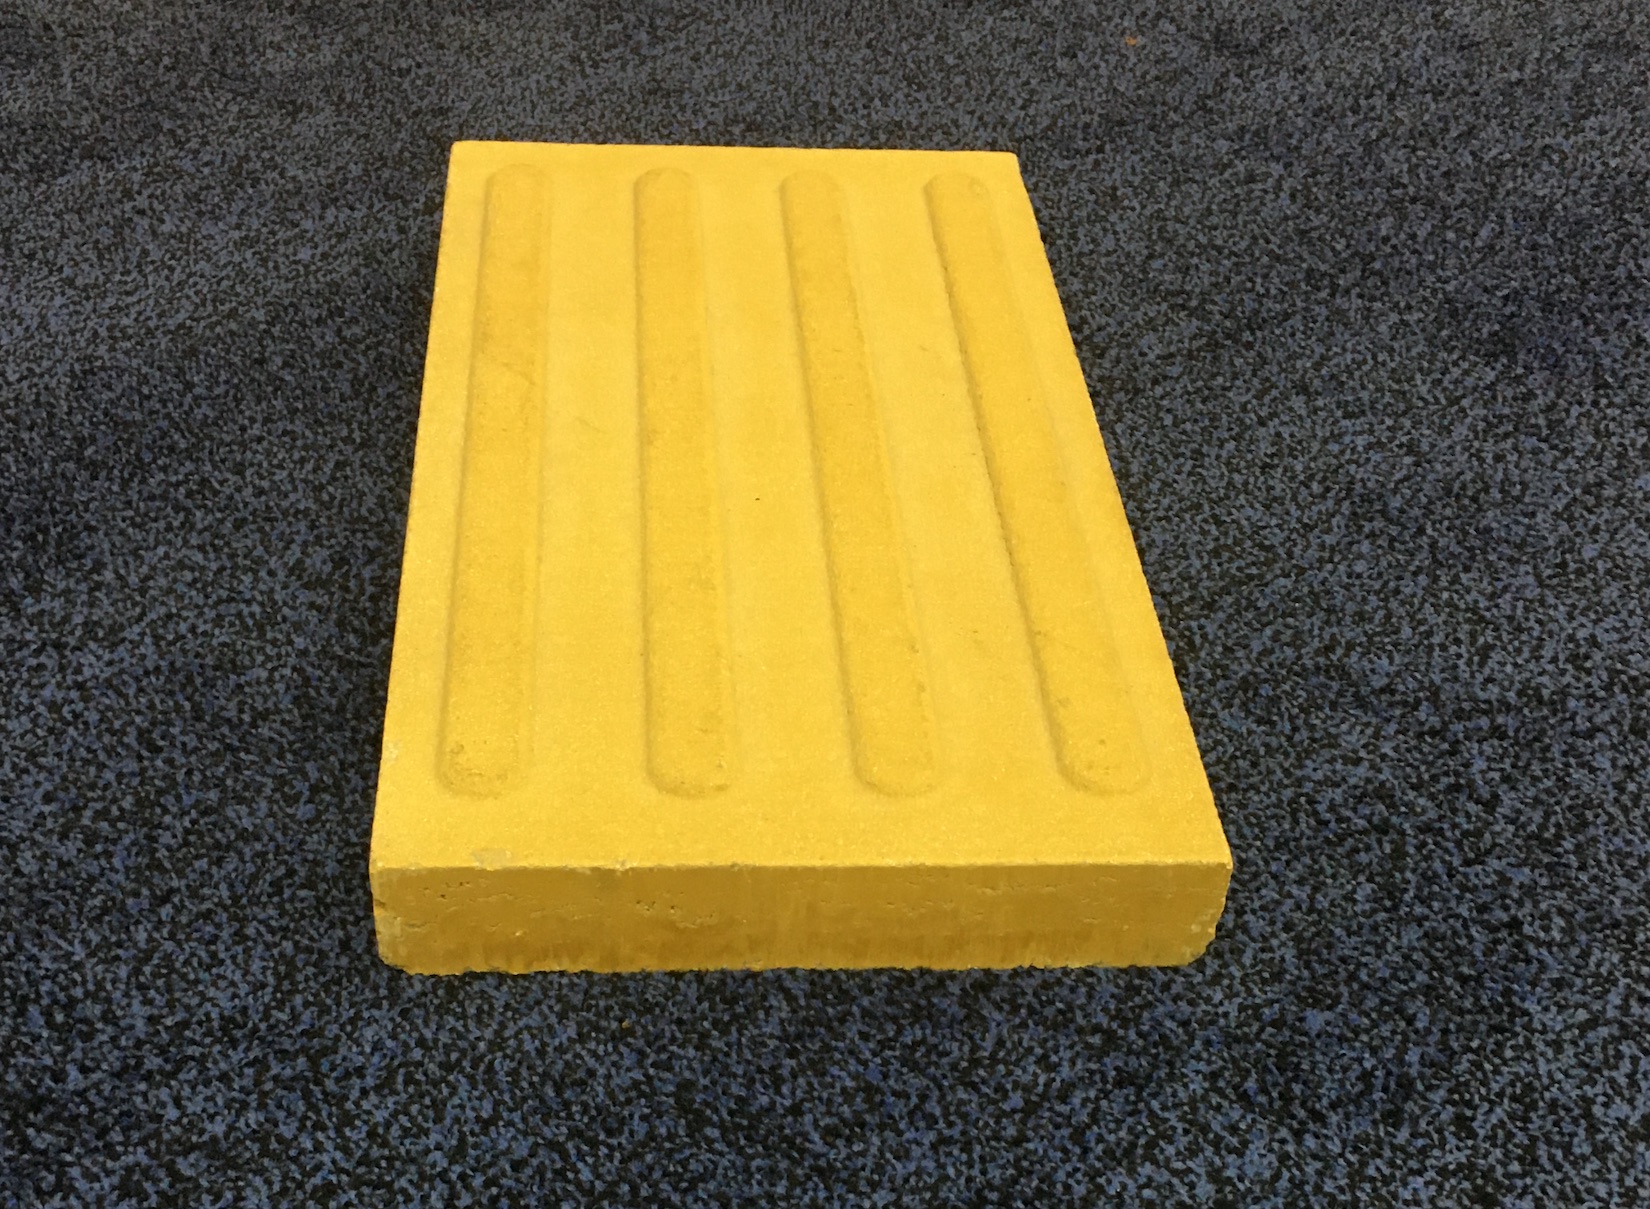 Product Image Test - Directional Paver